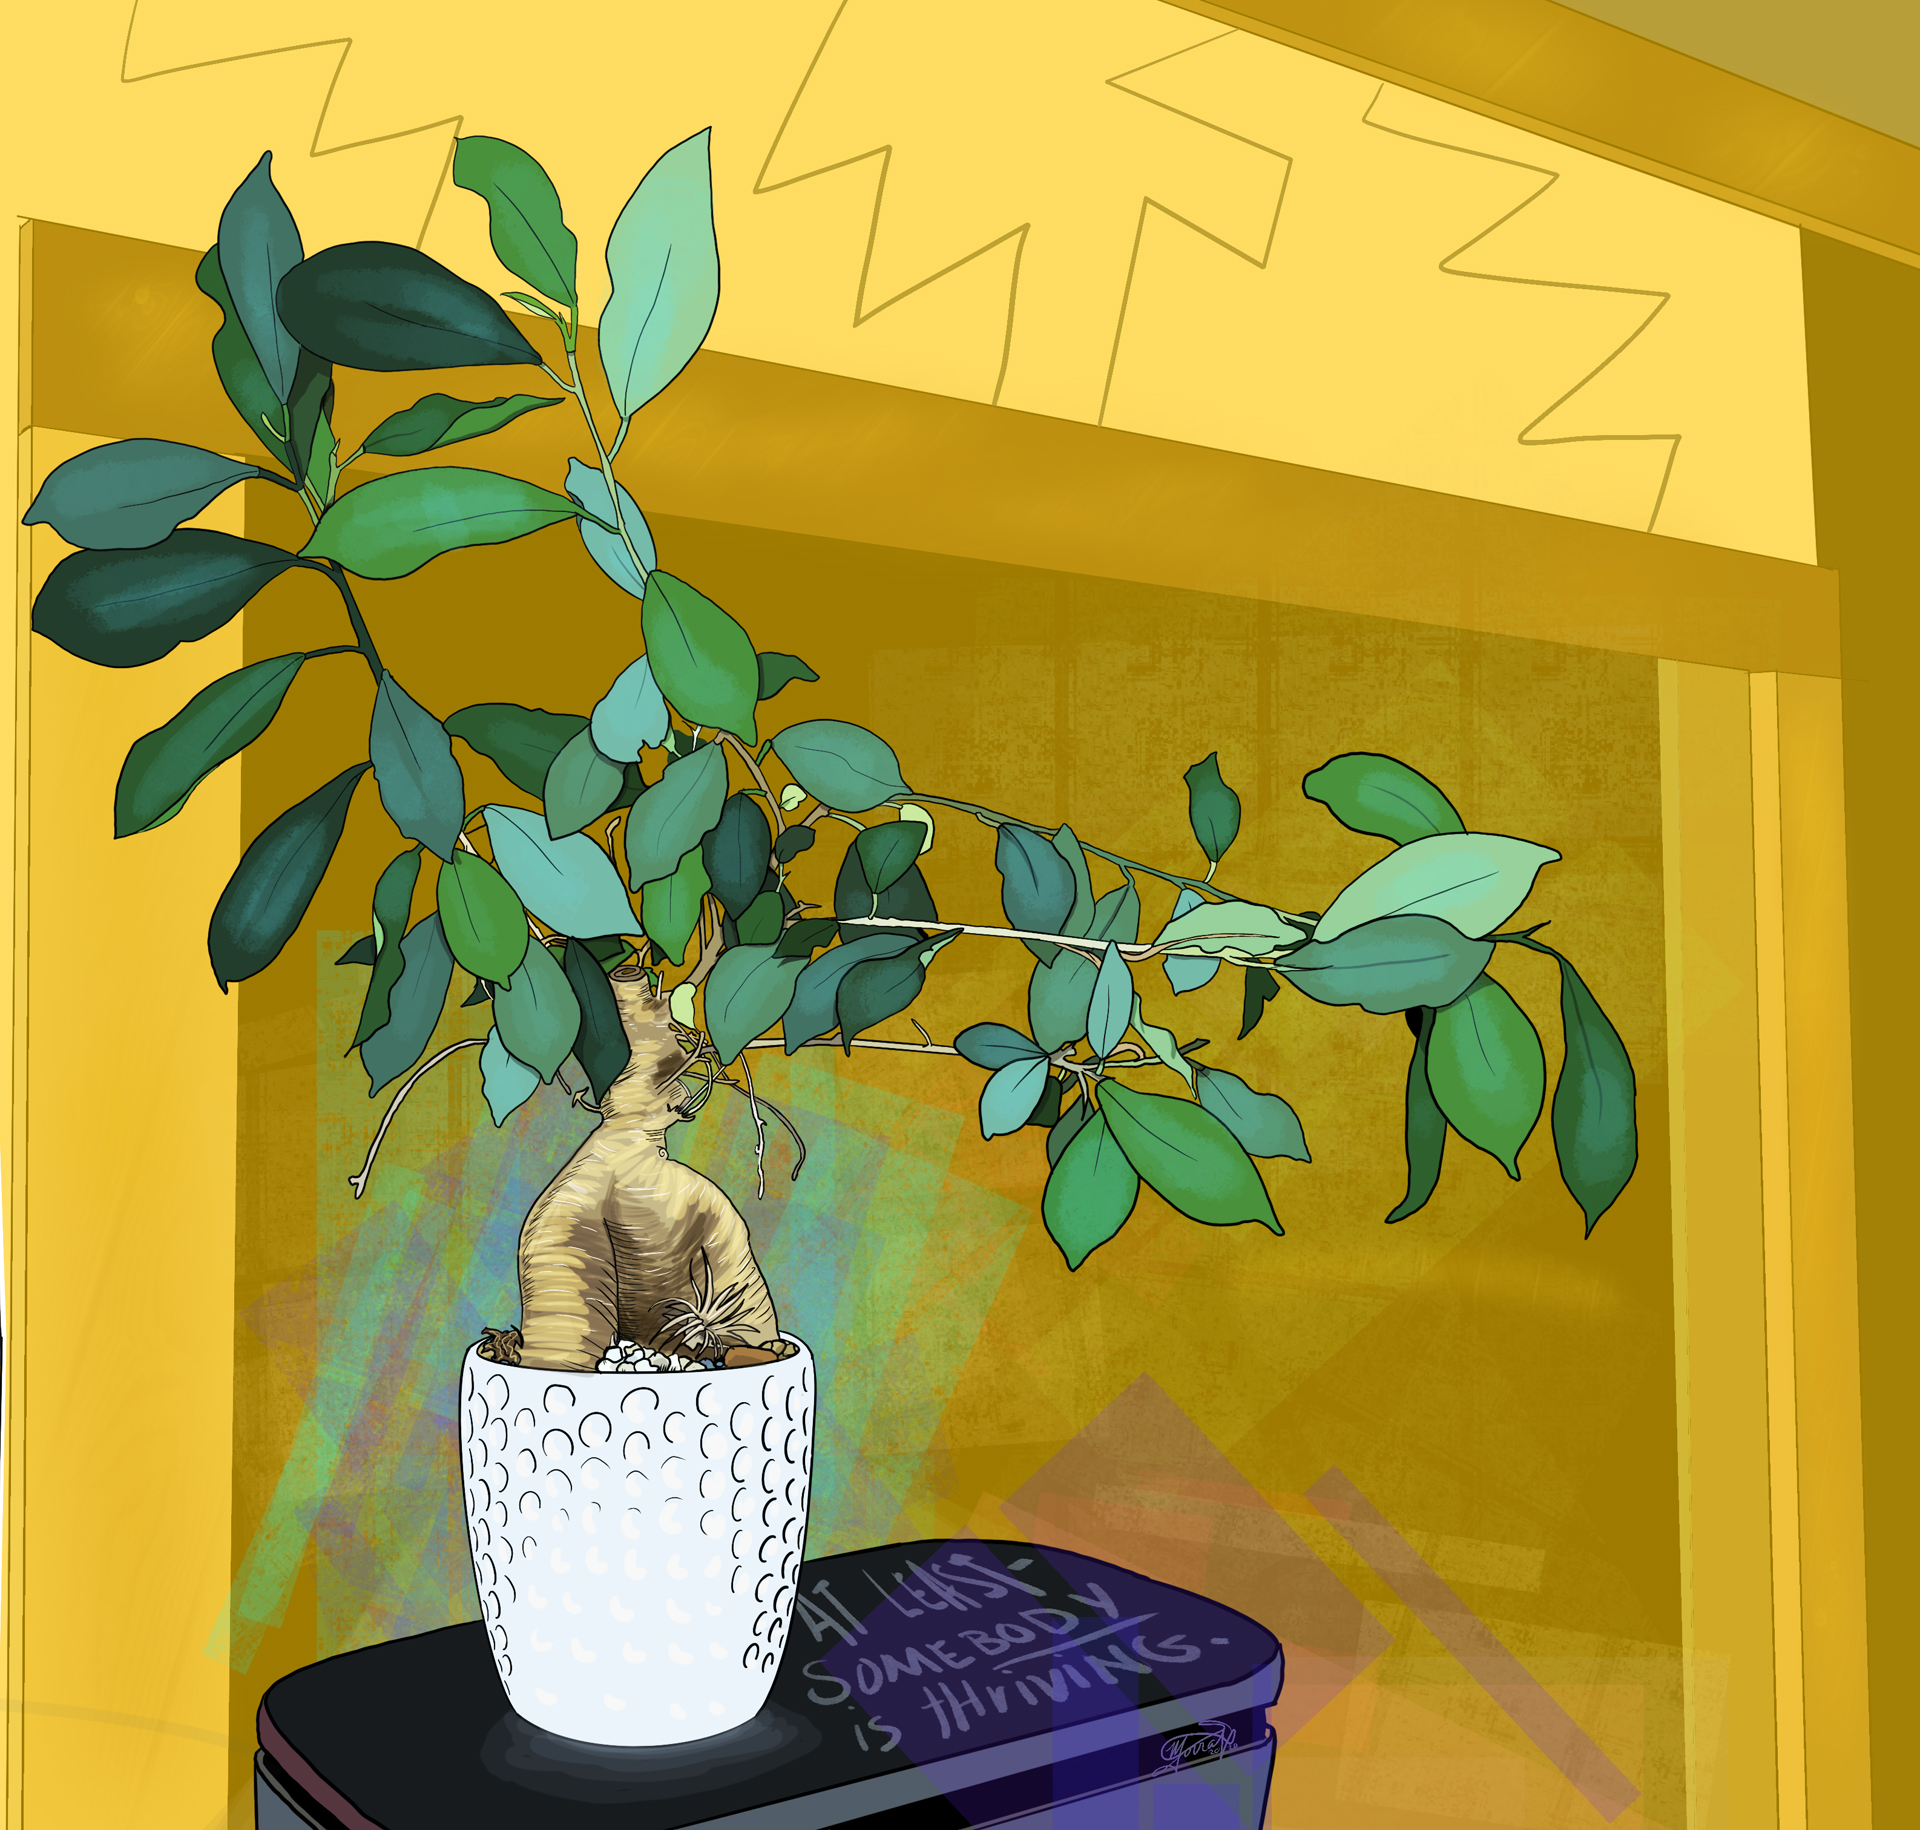 Digital illustration of a potted plant with green leaves in a white pot with a yellow wall and purple table